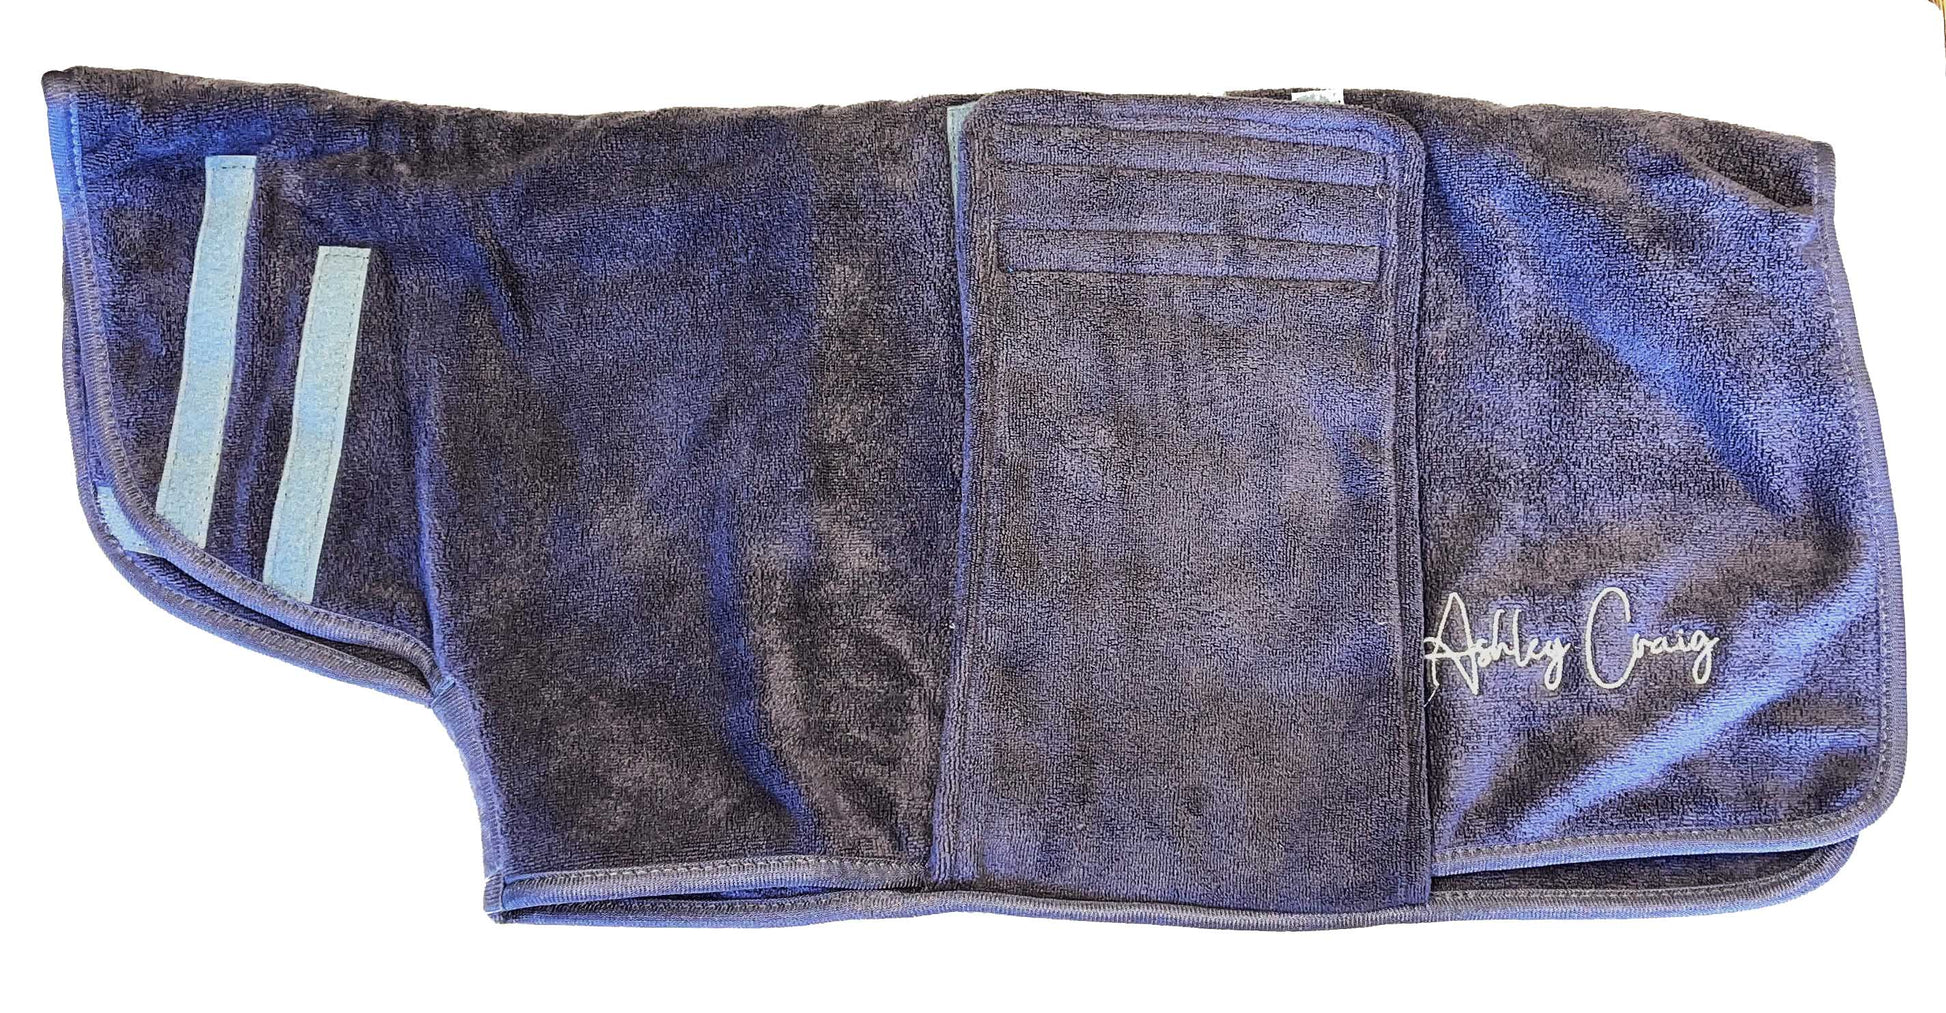 Ashley Craig has created a double-thickness velvet microfiber, pet robes which can absorb up to 50% more water than other microfiber towels, significantly reducing drying times. Ideal for preparing wire hair and flat coated breeds for show. Each robe has a secure Velcro closure and fits over the head with ease. Gray.